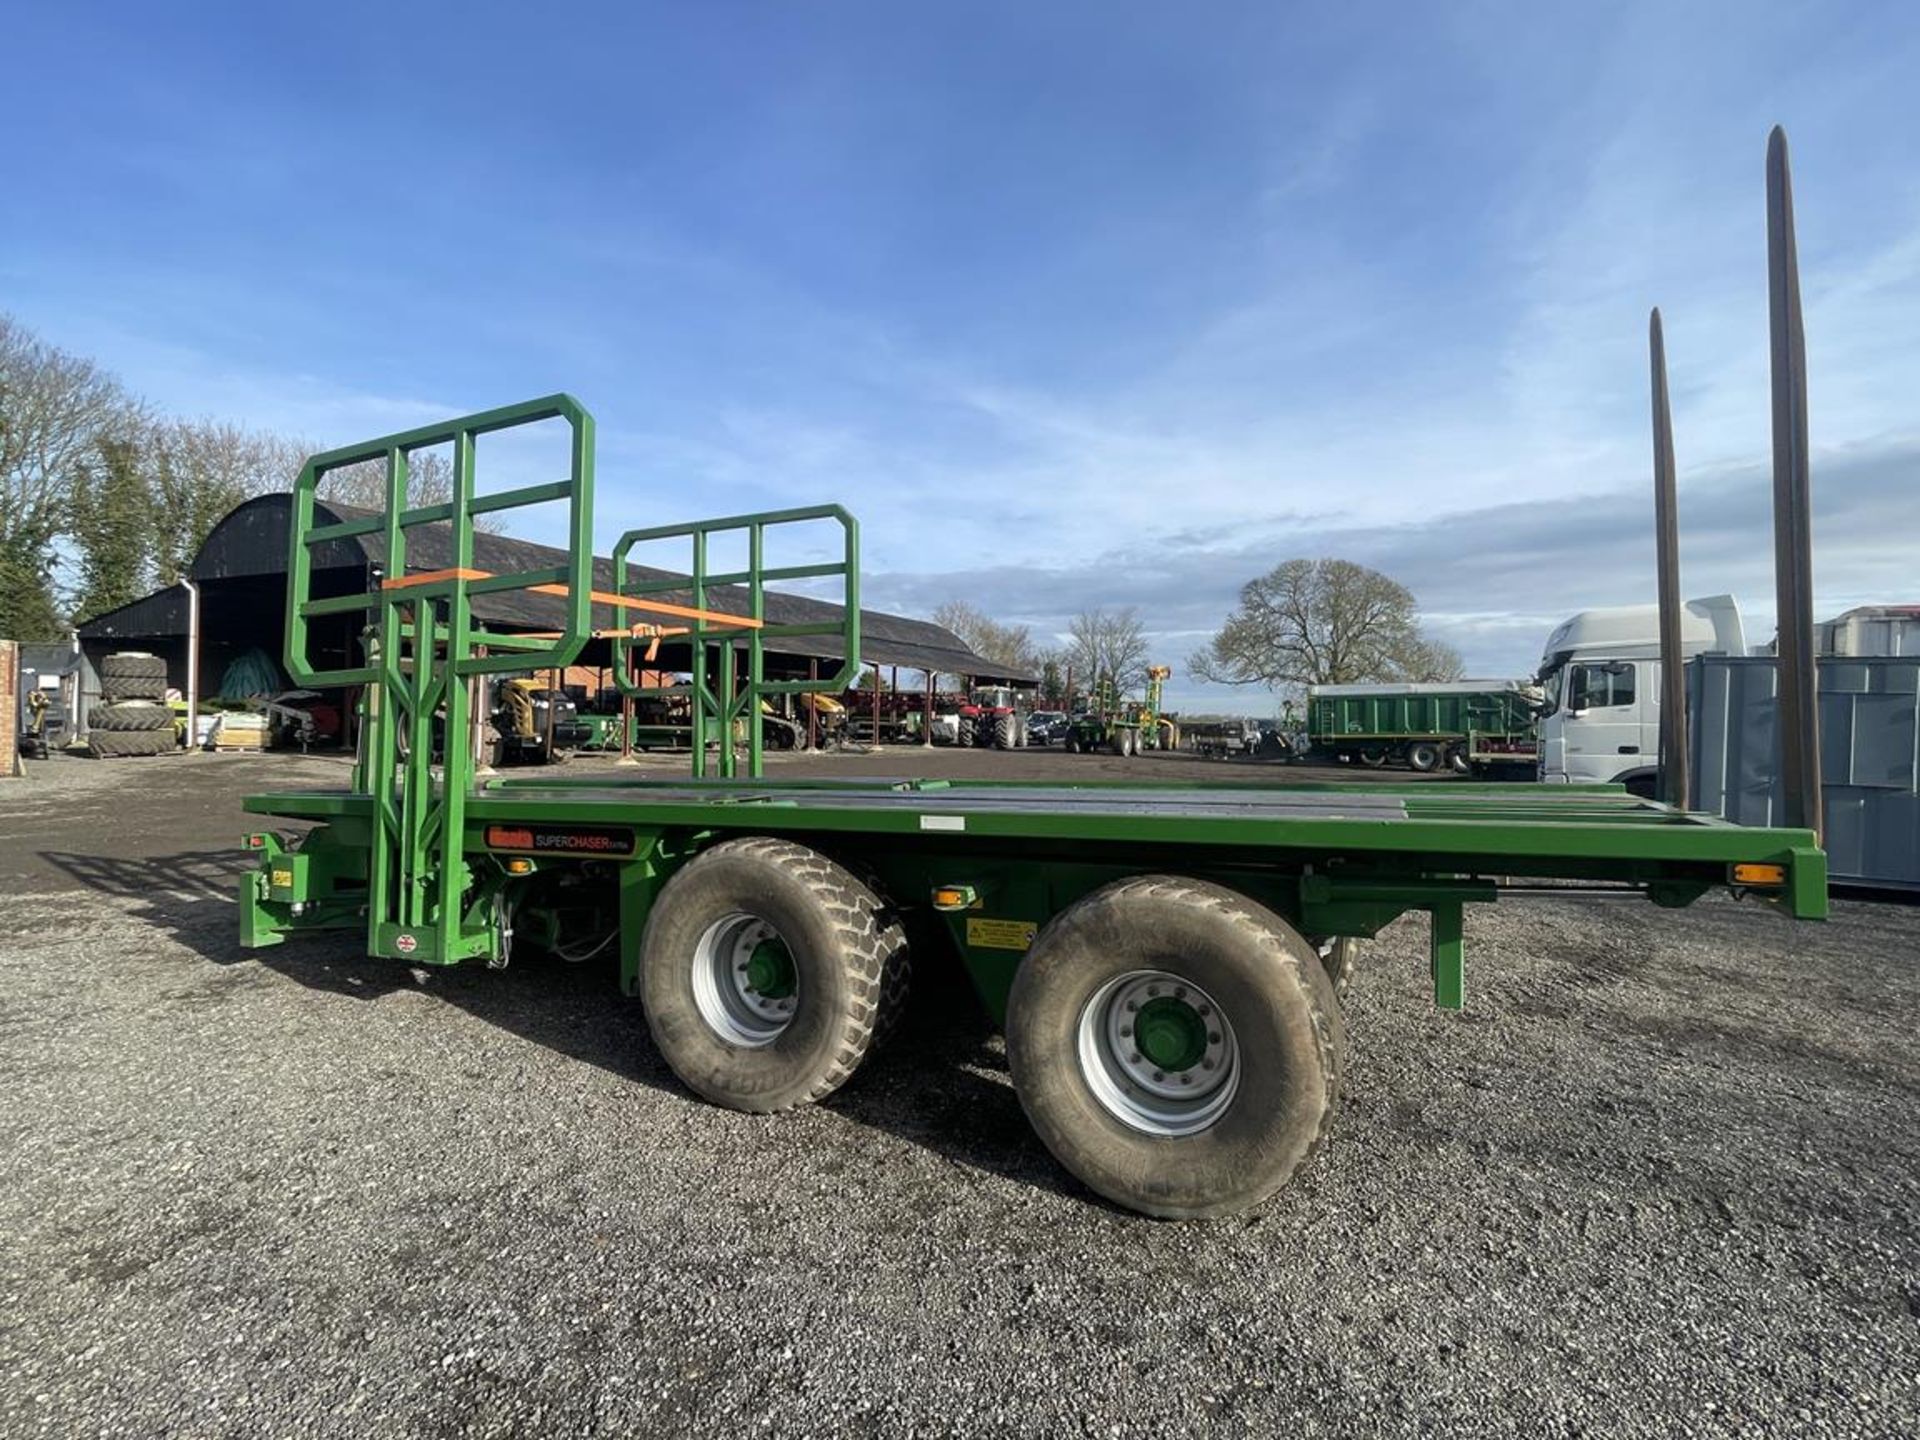 2015 Heath Superchaser Model Super Extra Bale Chaser, Double Axle Trailer S/No. BB15728, Air Brakes, - Image 2 of 9